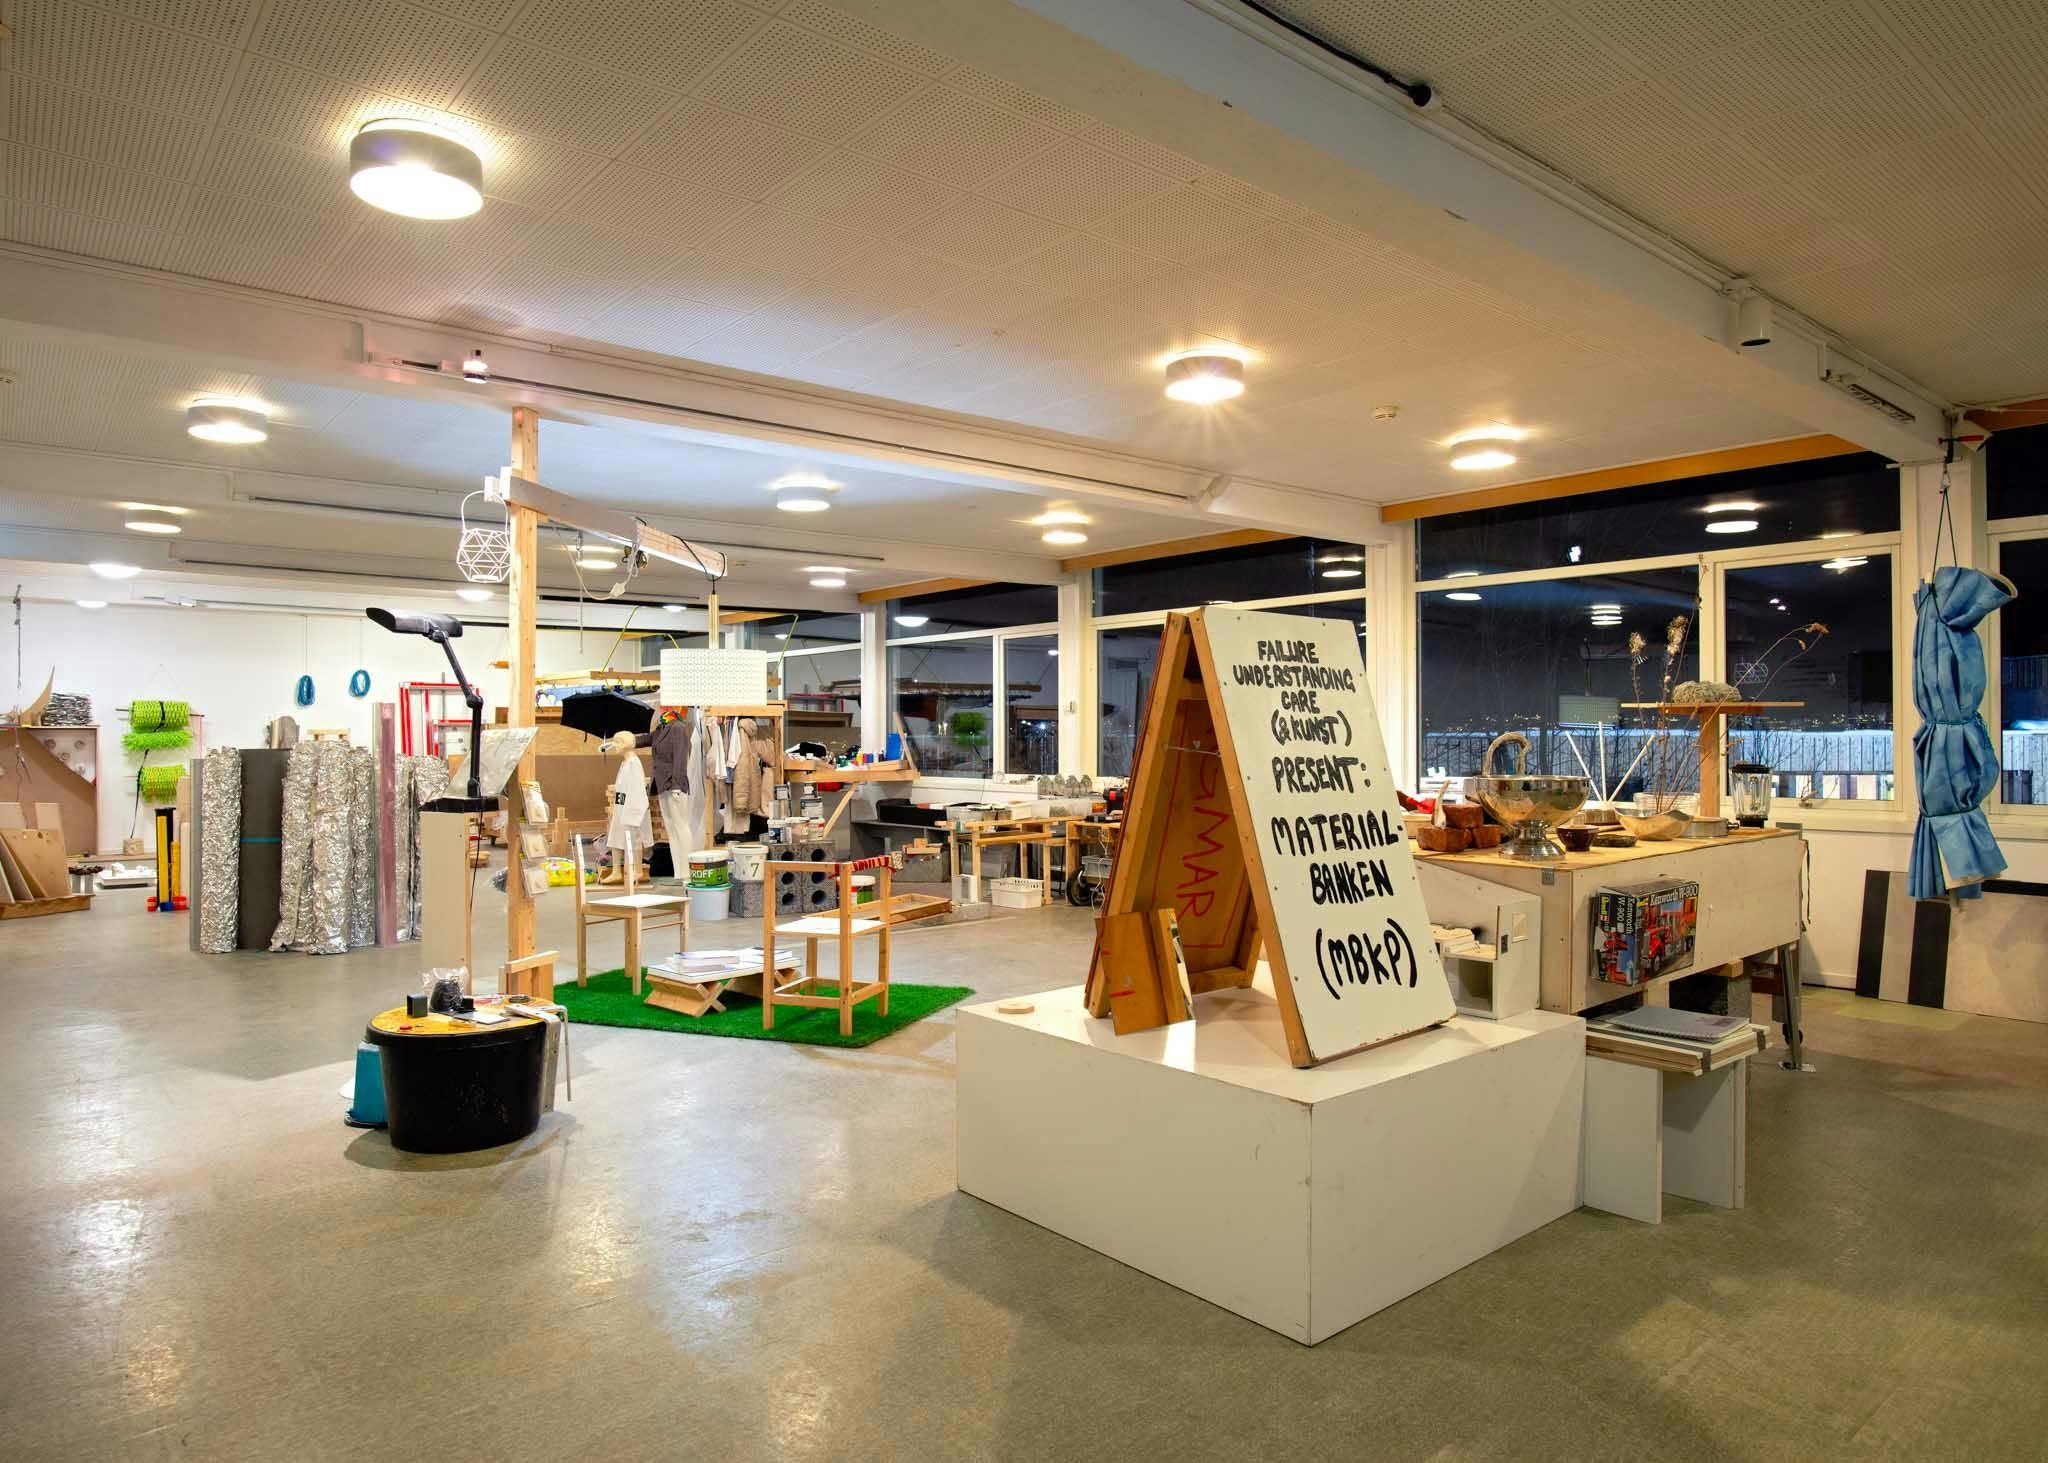 A large room filled with various objects. A poster board reads 'Material banken'.